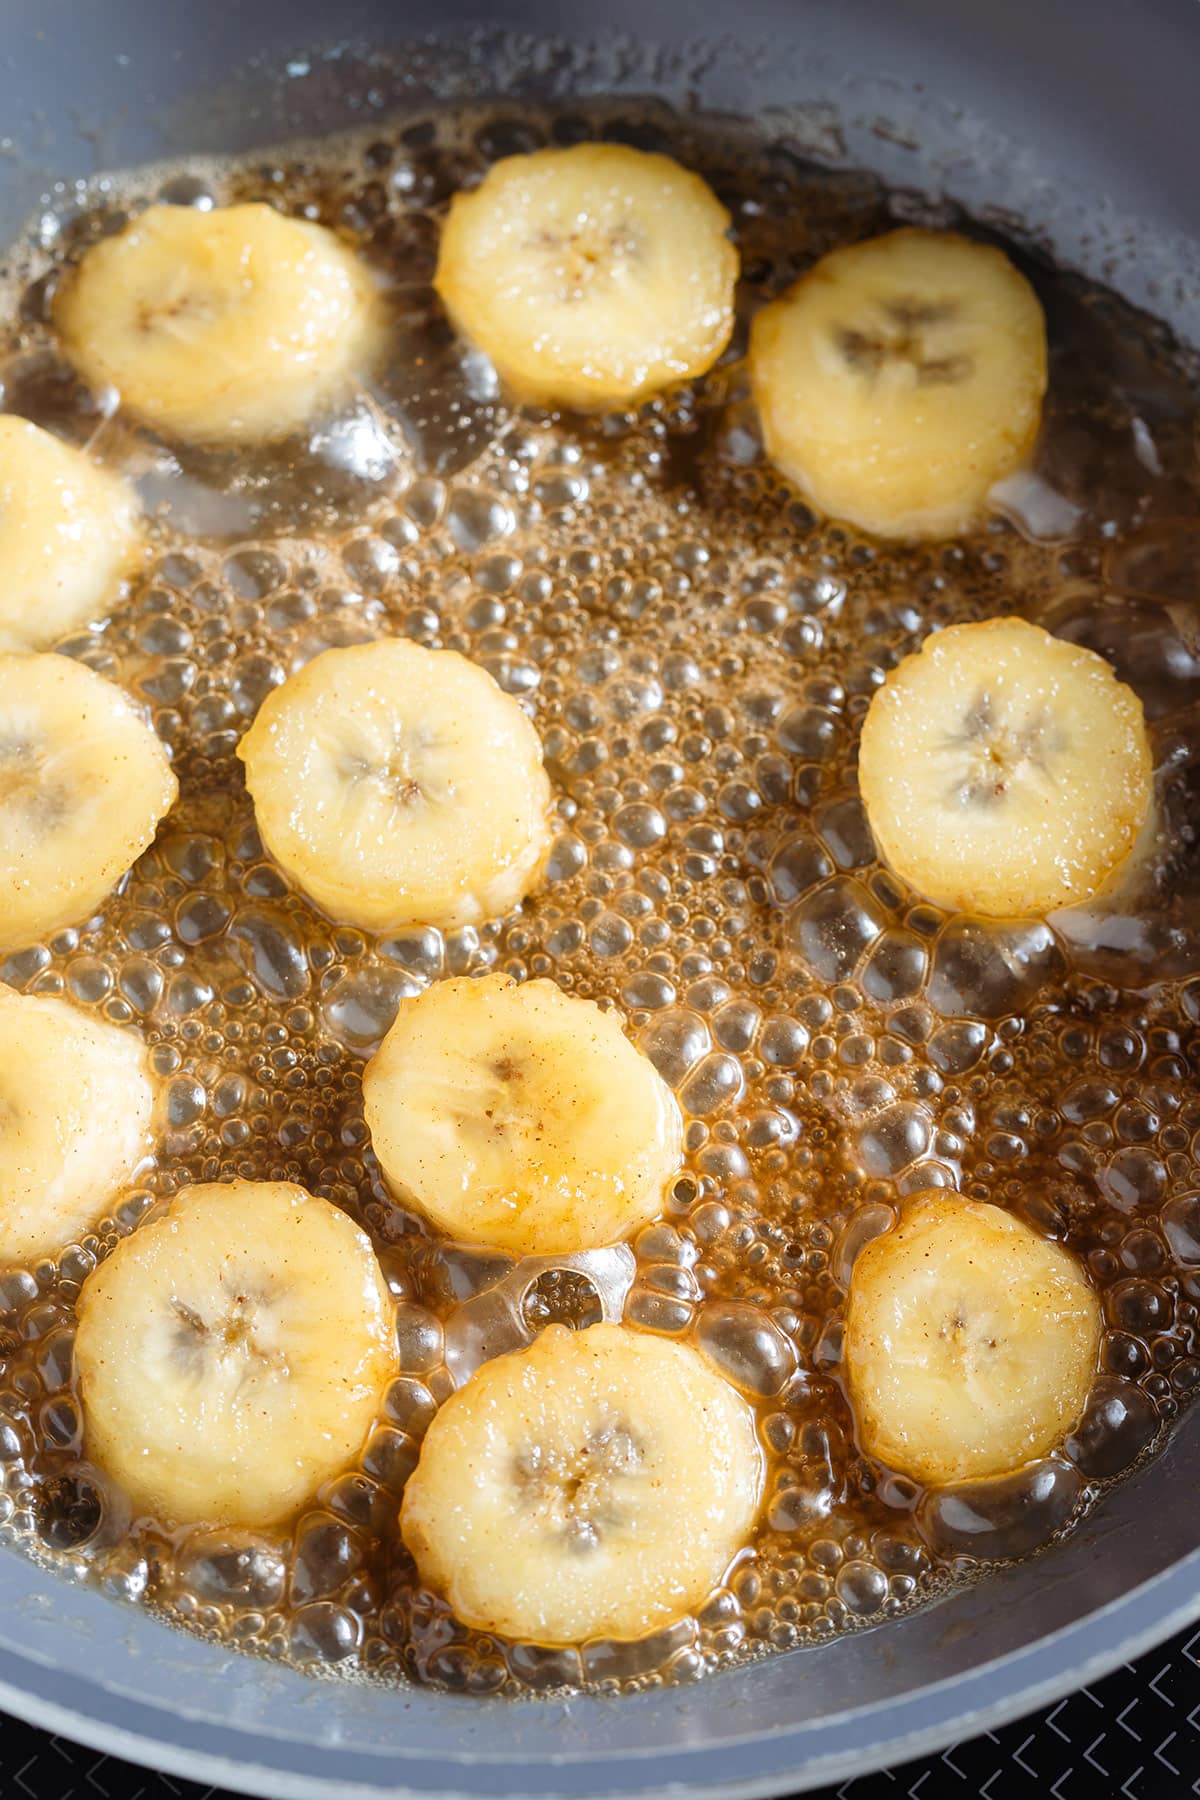 Banana slicing simmering with butter and maple syrup in a non-stick pan.